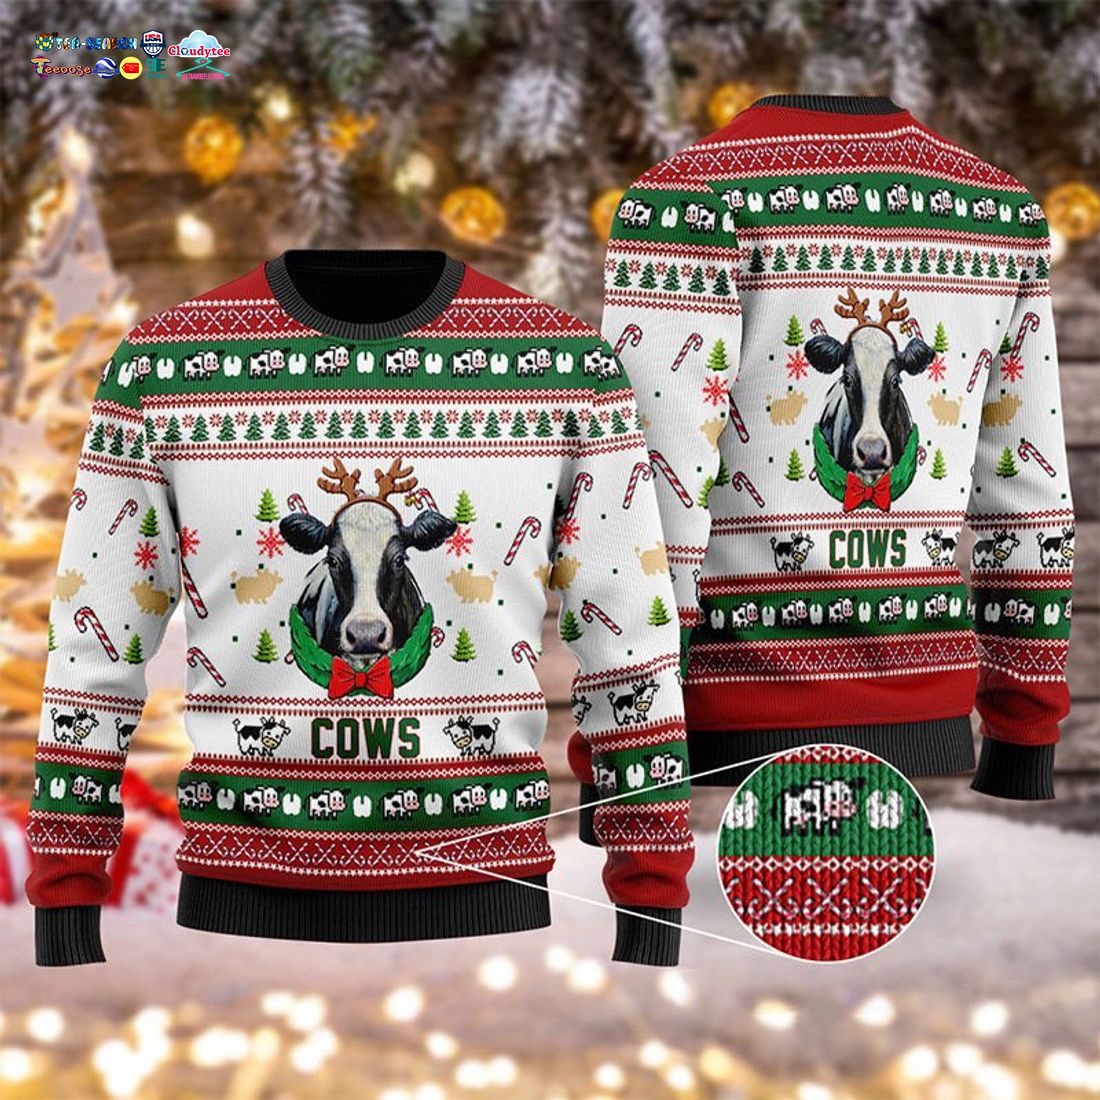 Cows Ugly Christmas Sweater - My favourite picture of yours